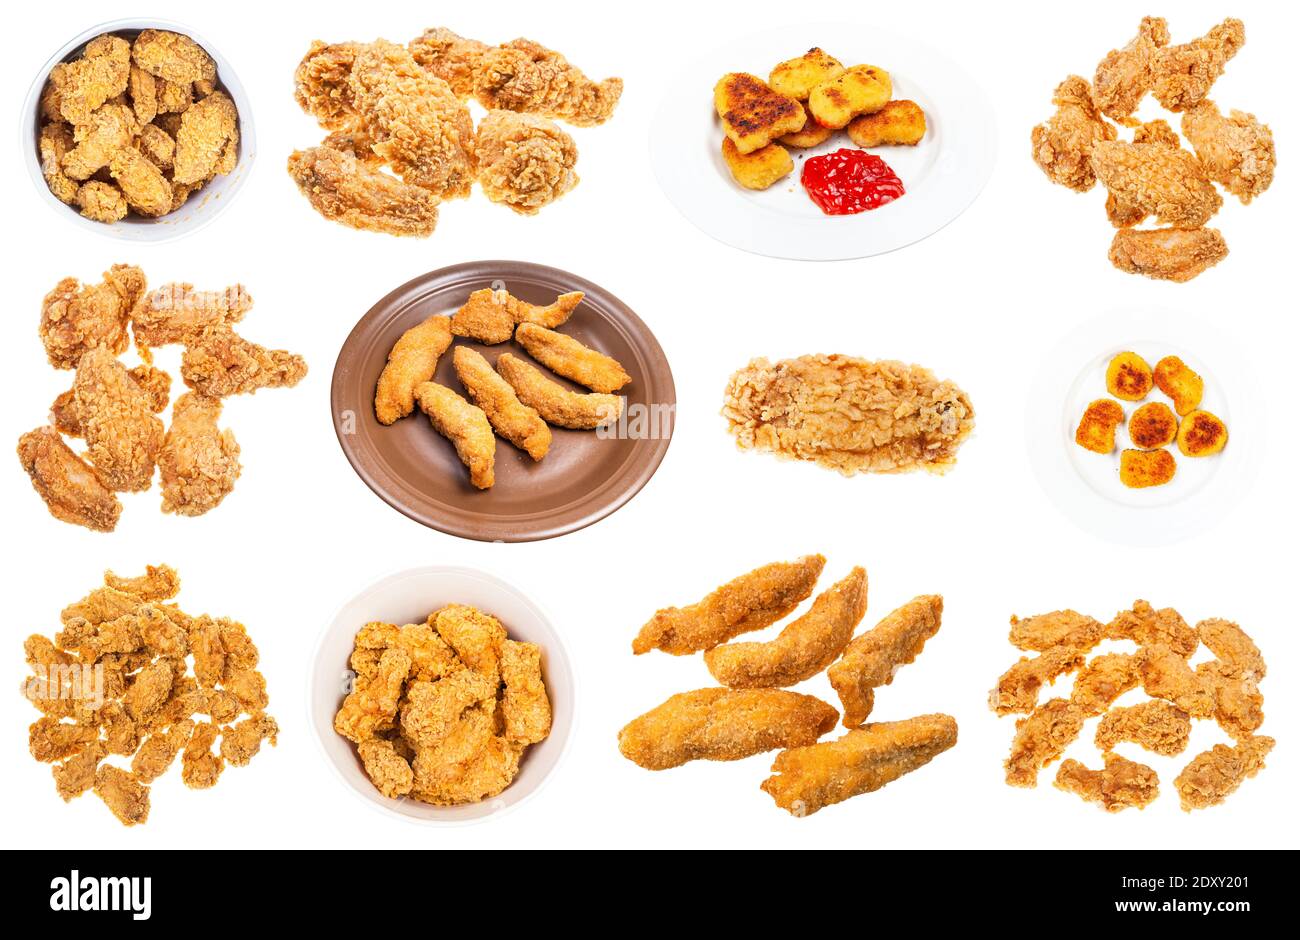 set of various deep fried chicken pieces (nuggets, strips, wings, etc) isolated on white background Stock Photo